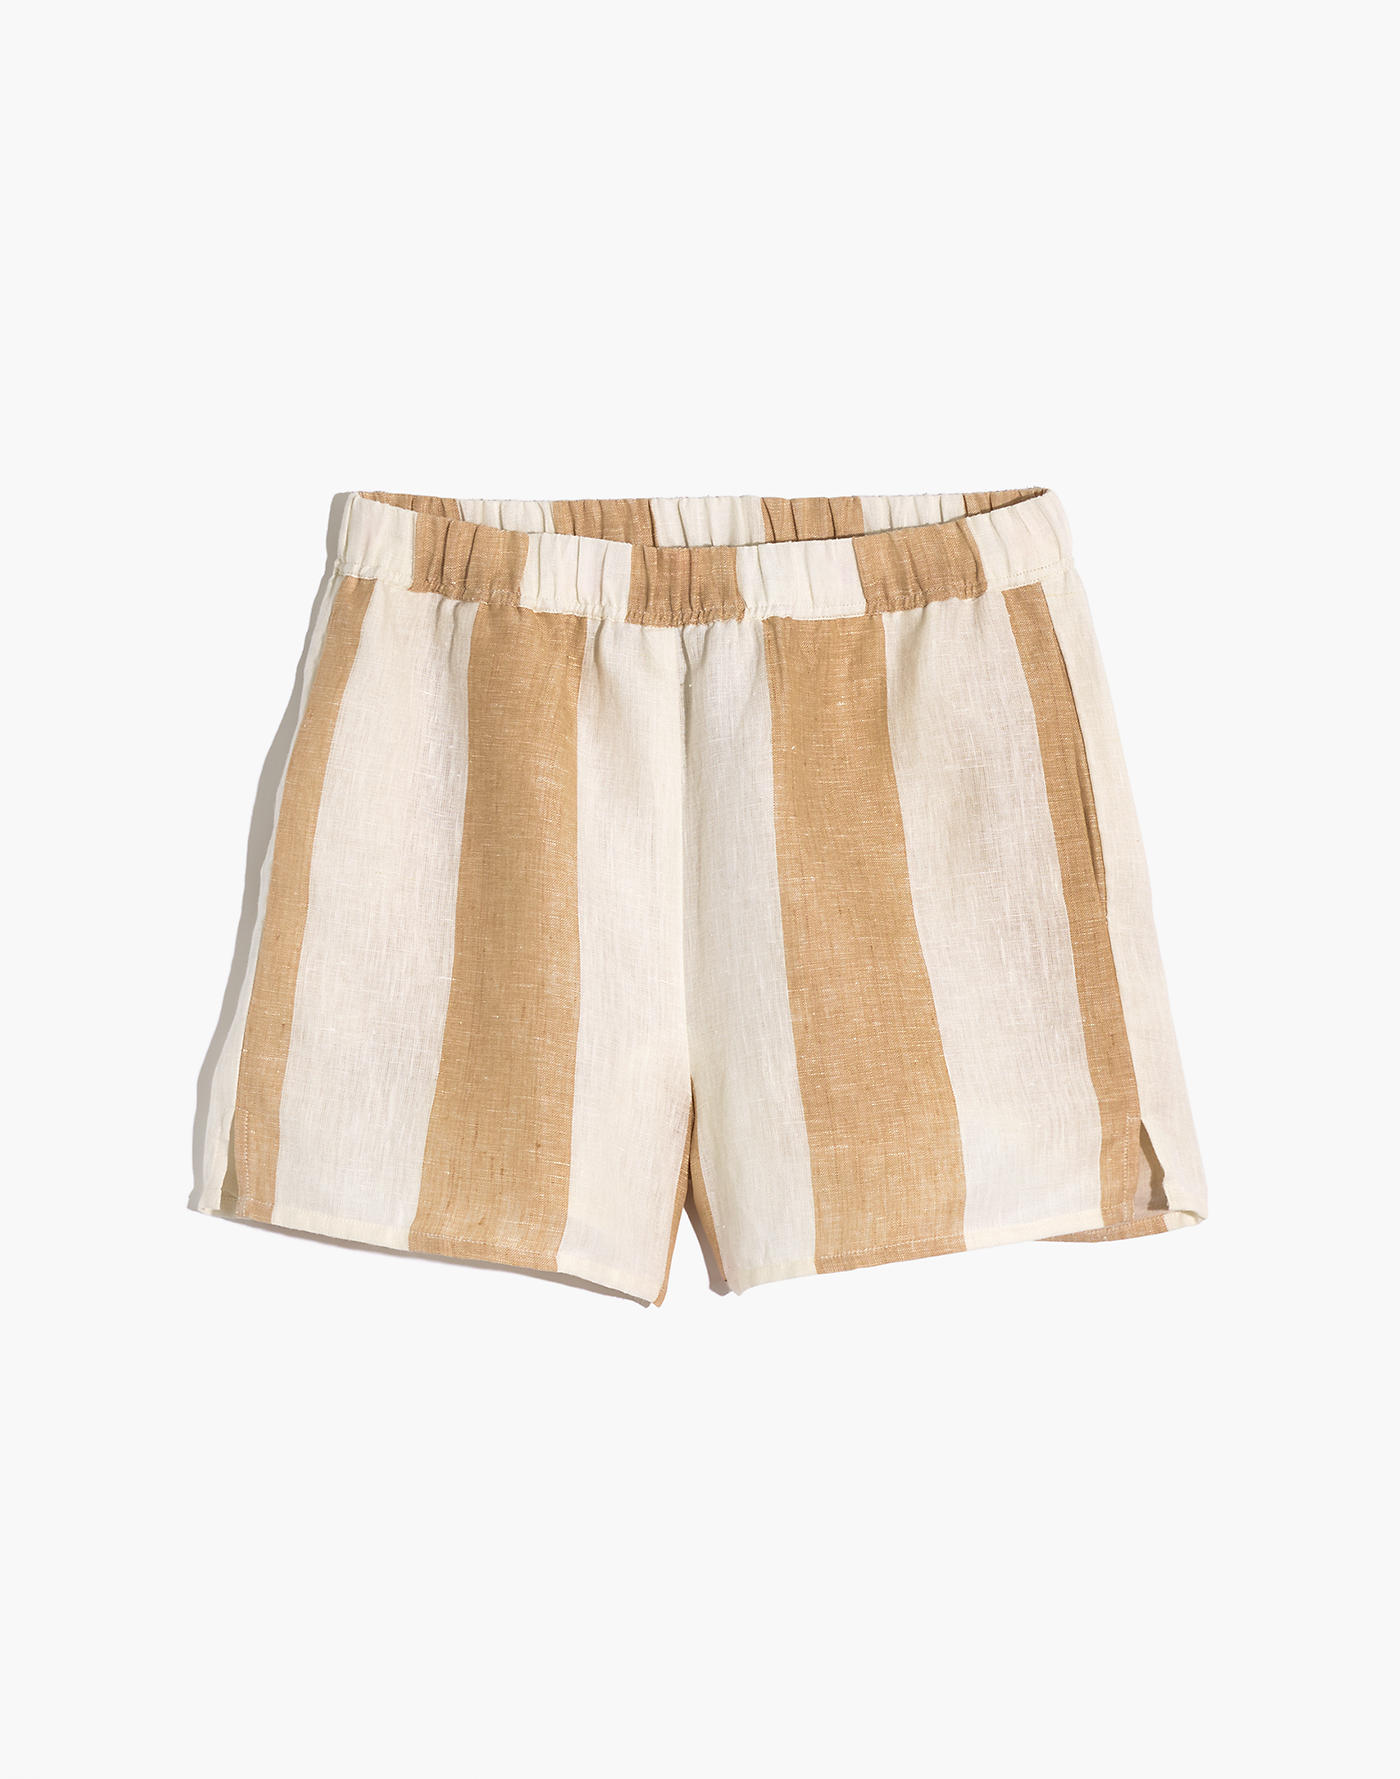 Madewell x LAUDE the Label Everyday Shorts in Tulum Stripe